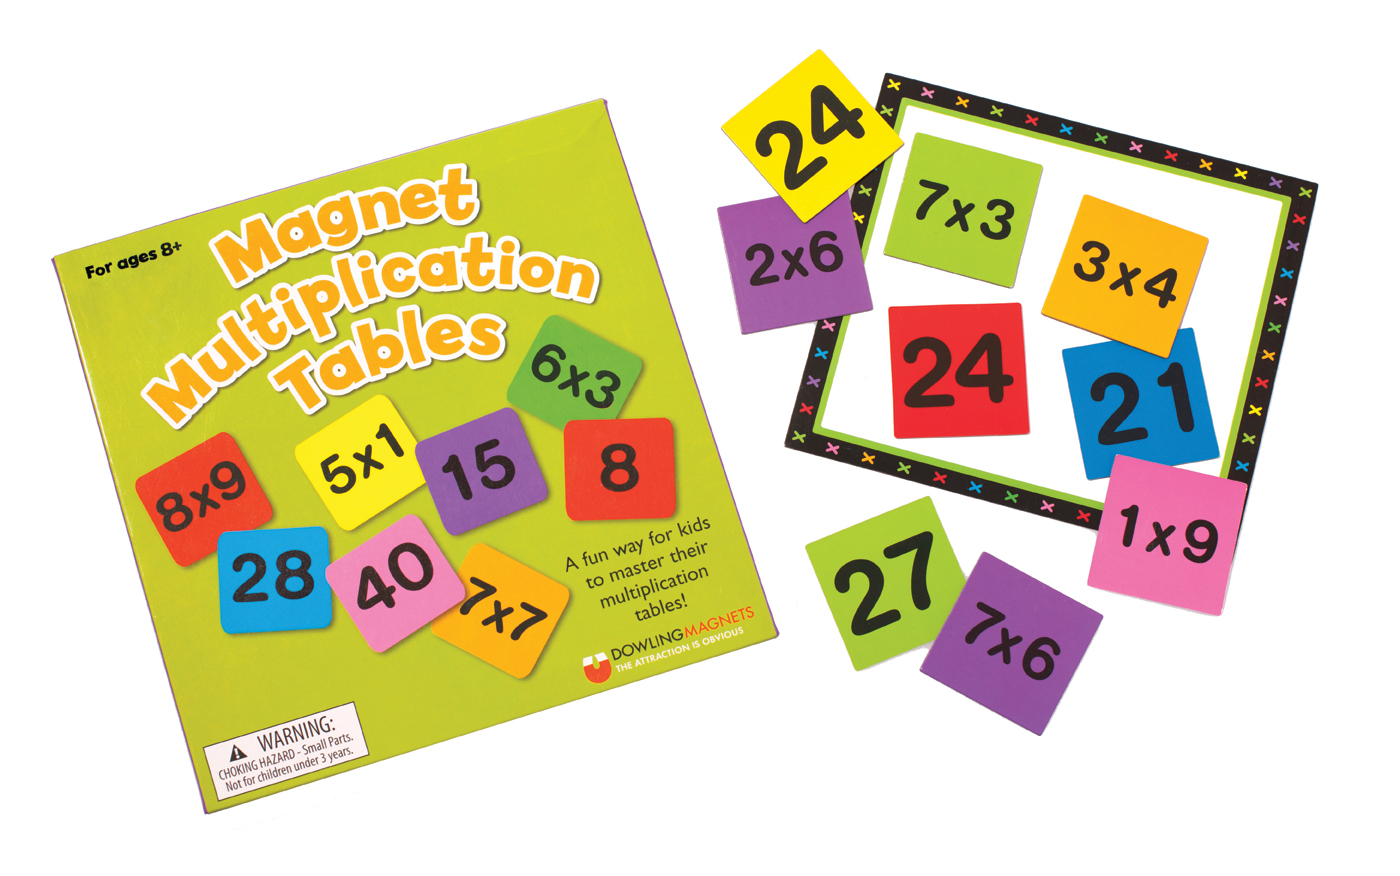 Magnetic Multiplication Tables